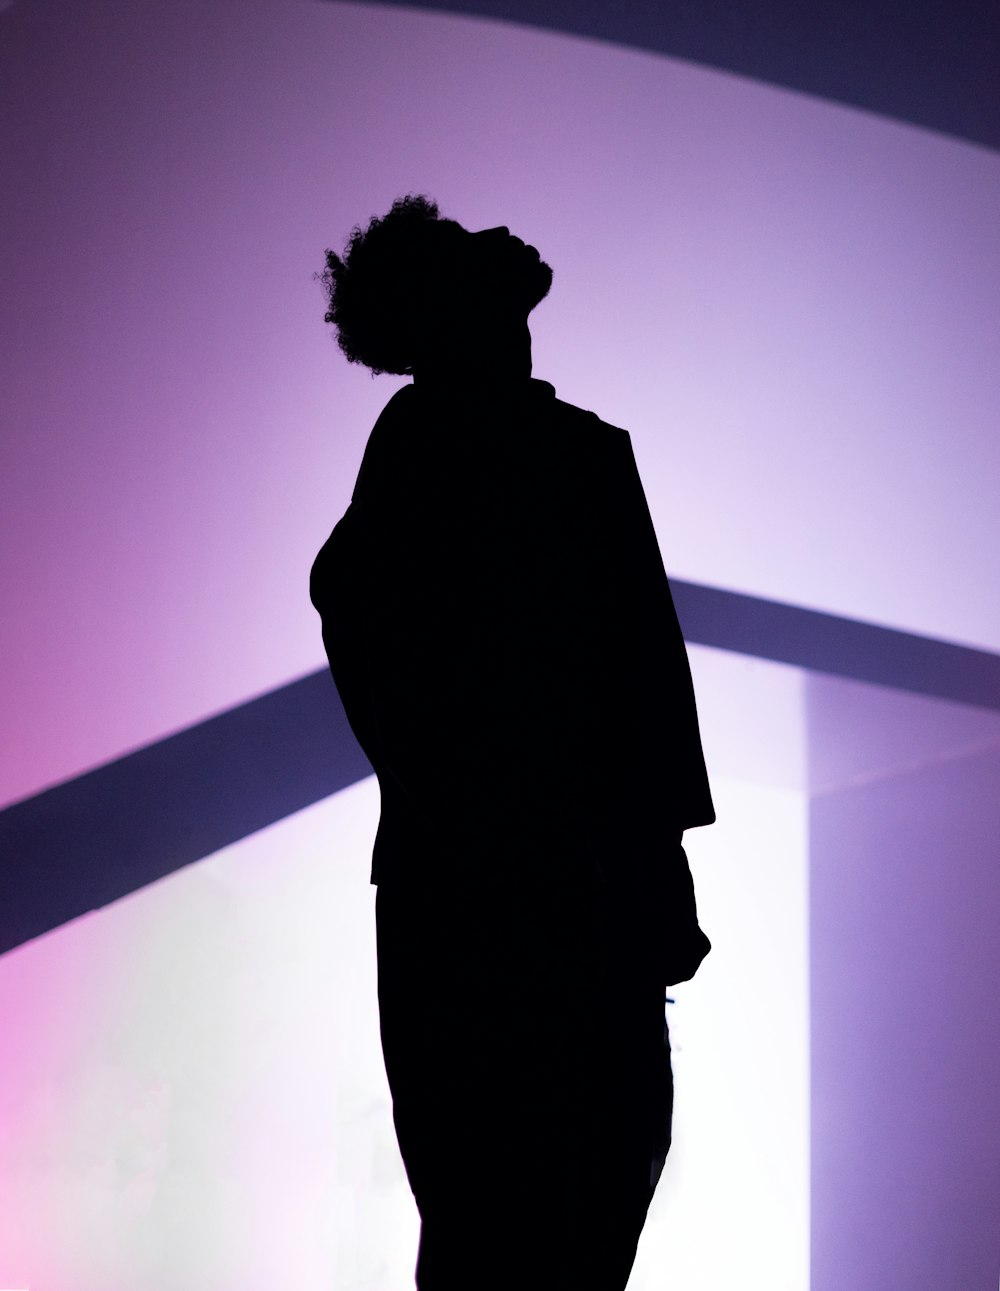 a silhouette of a person standing in front of a wall